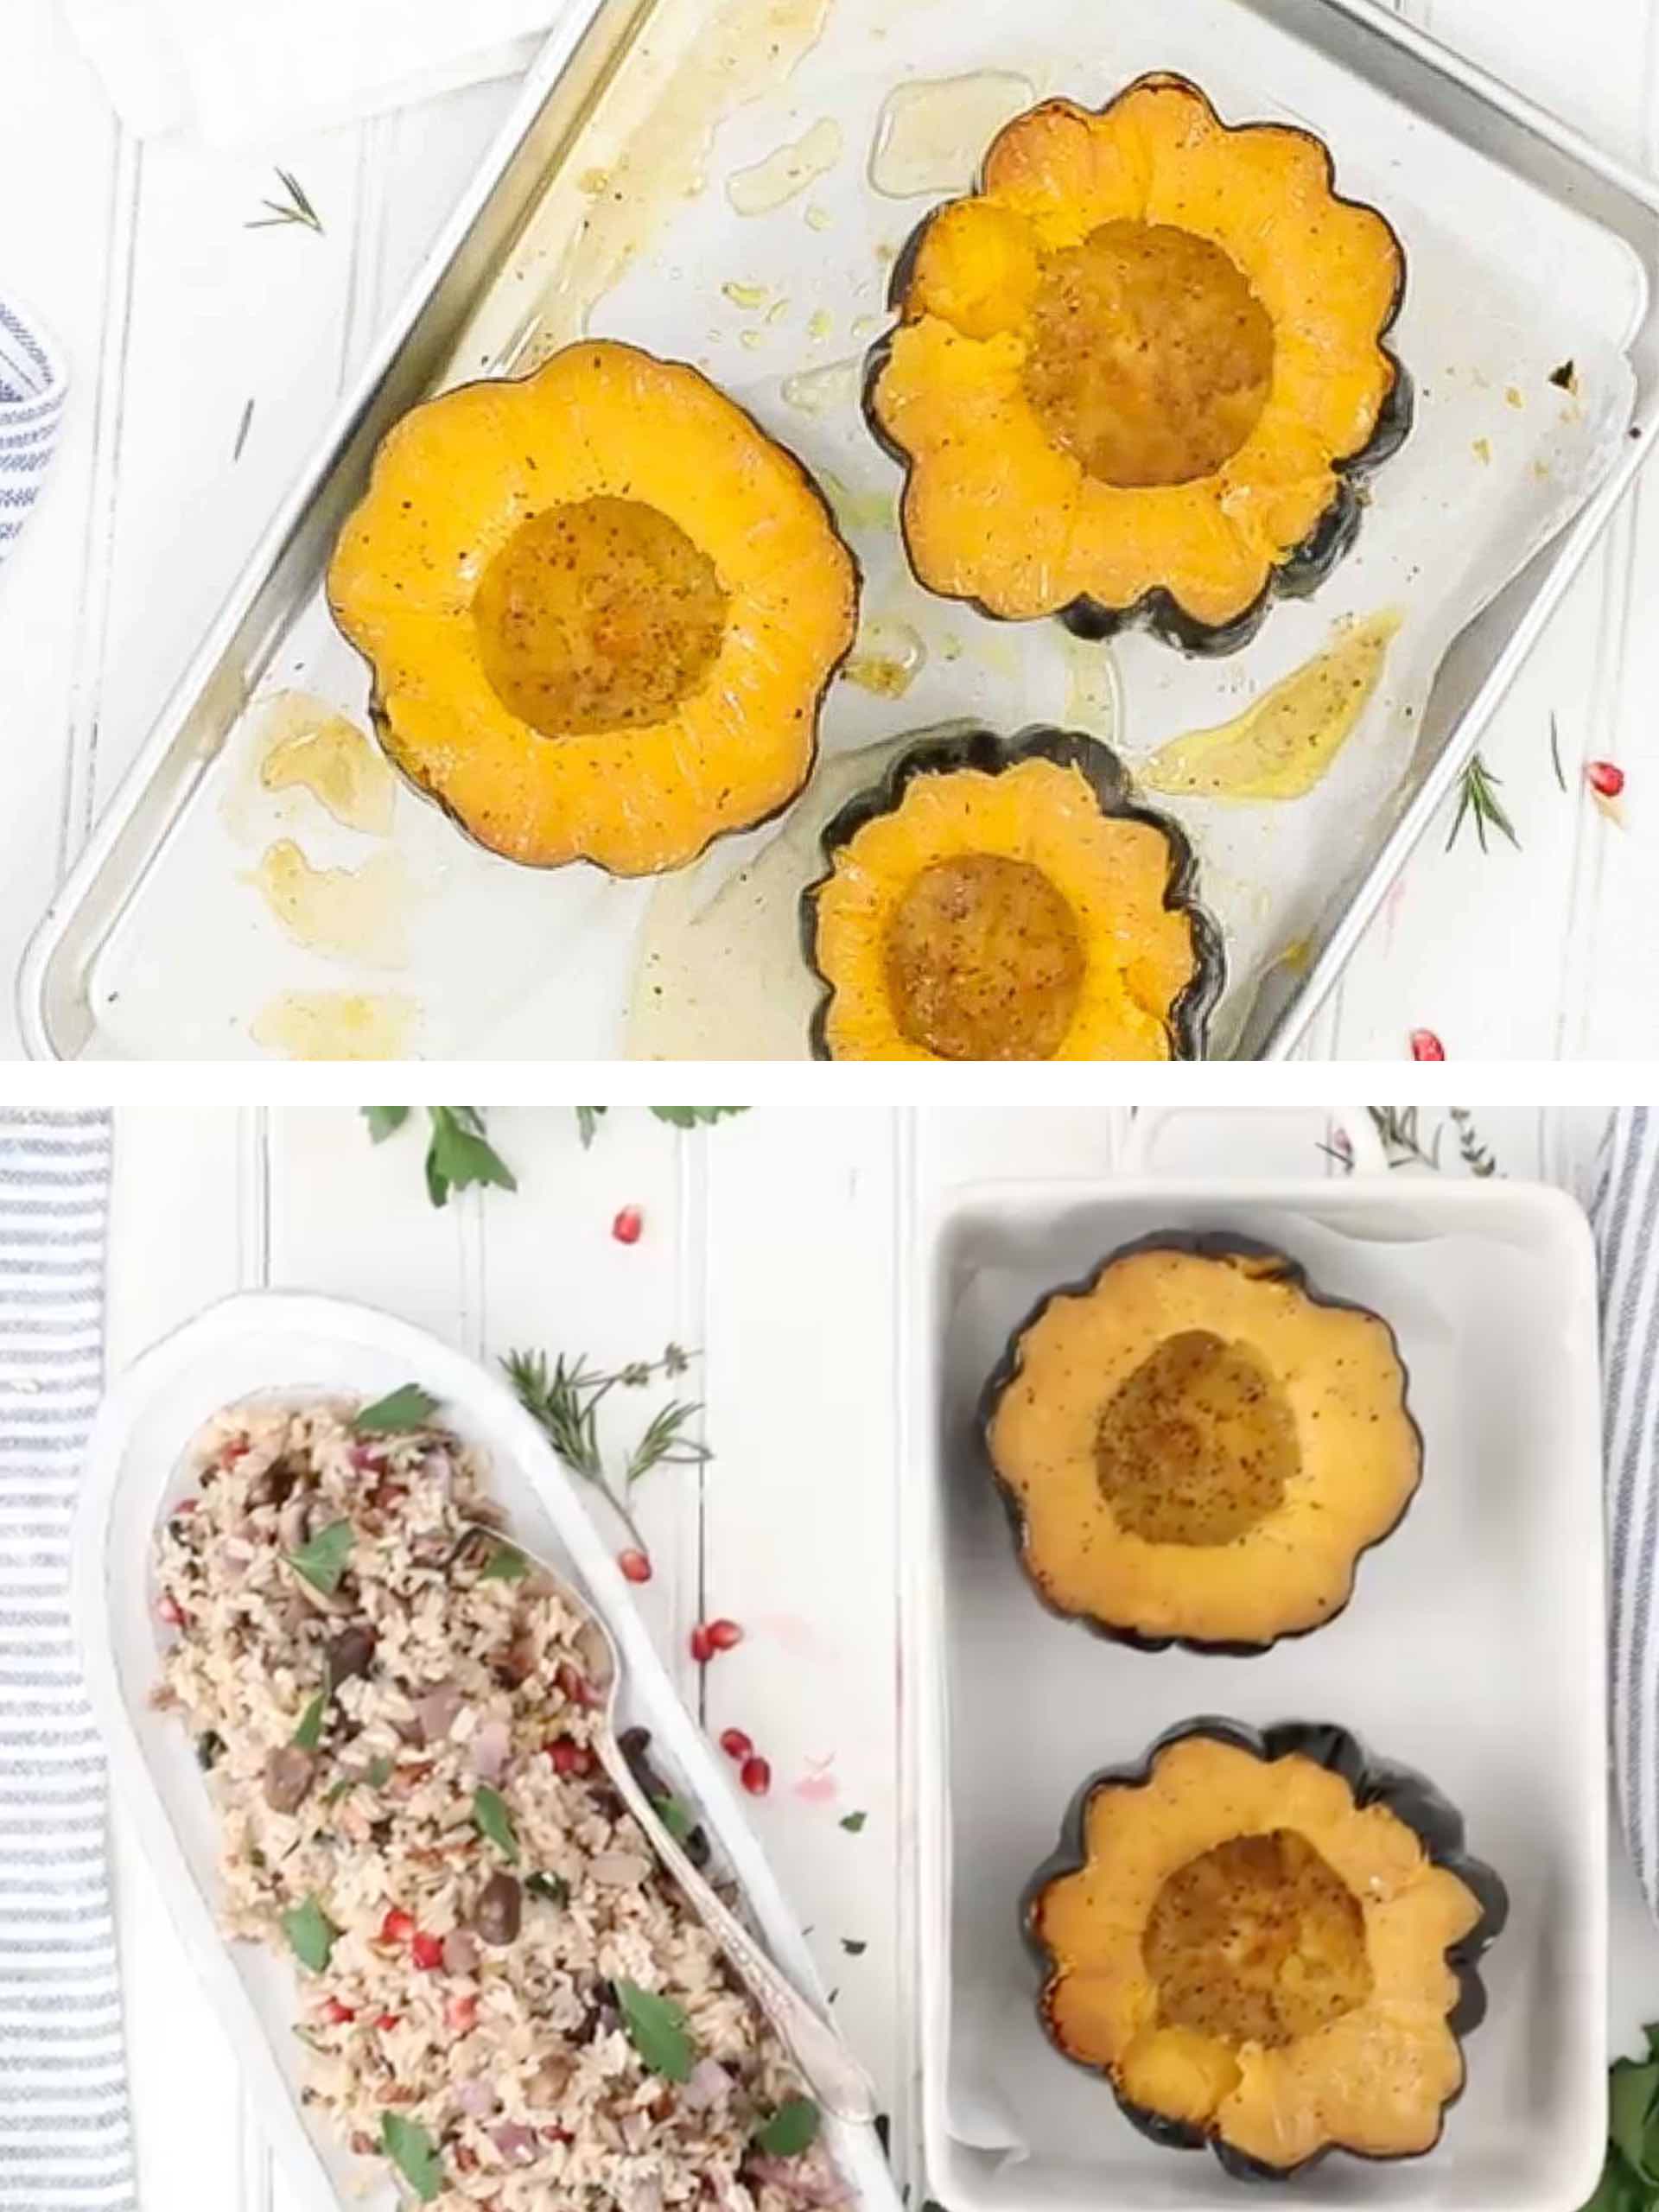 How To Make Oven Roasted Acorn Squash